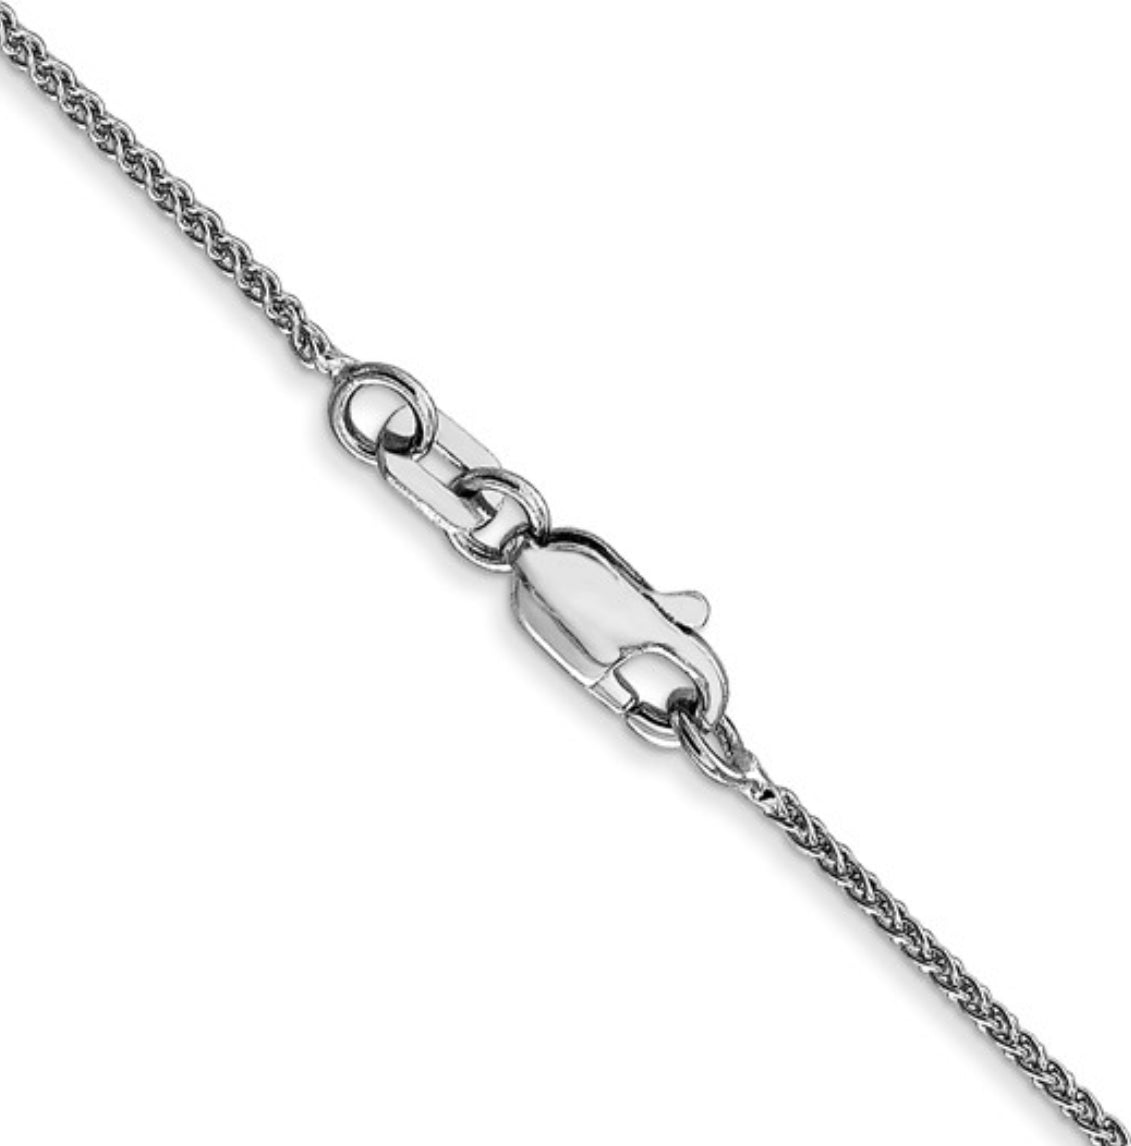 14K White Gold .85MM Spiga Chain with Lobster Clasp